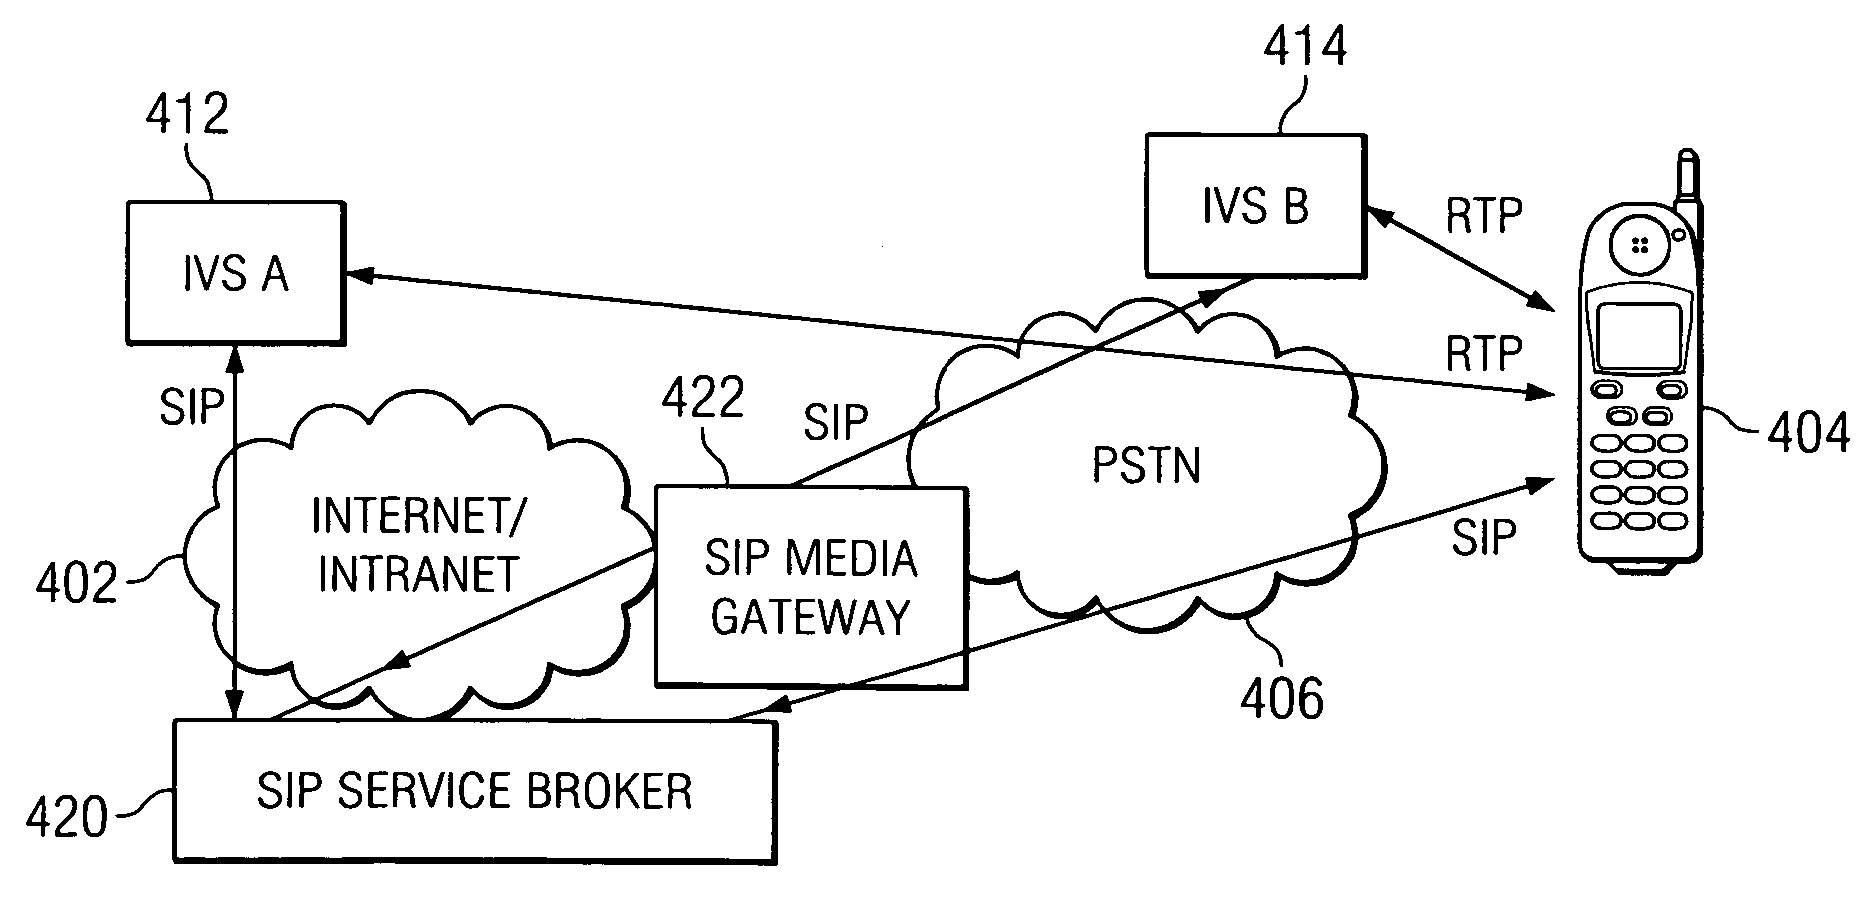 Composite voice applications and services using single sign-on across heterogeneous voice servers